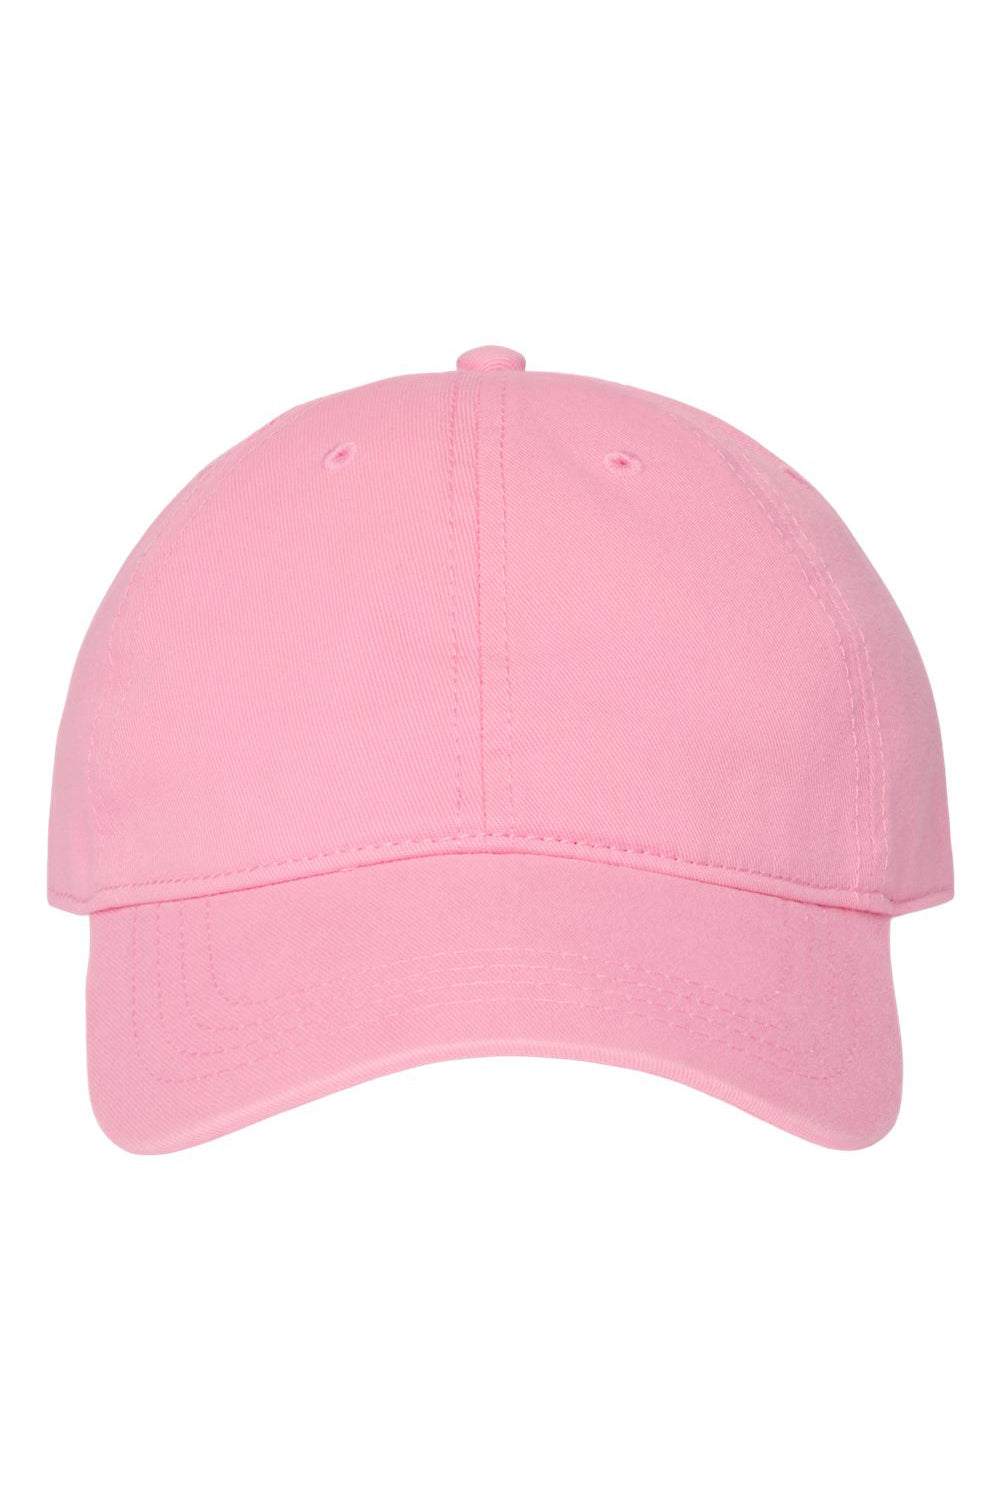 Cap America i1002 Mens Relaxed Adjustable Dad Hat Pink Flat Front